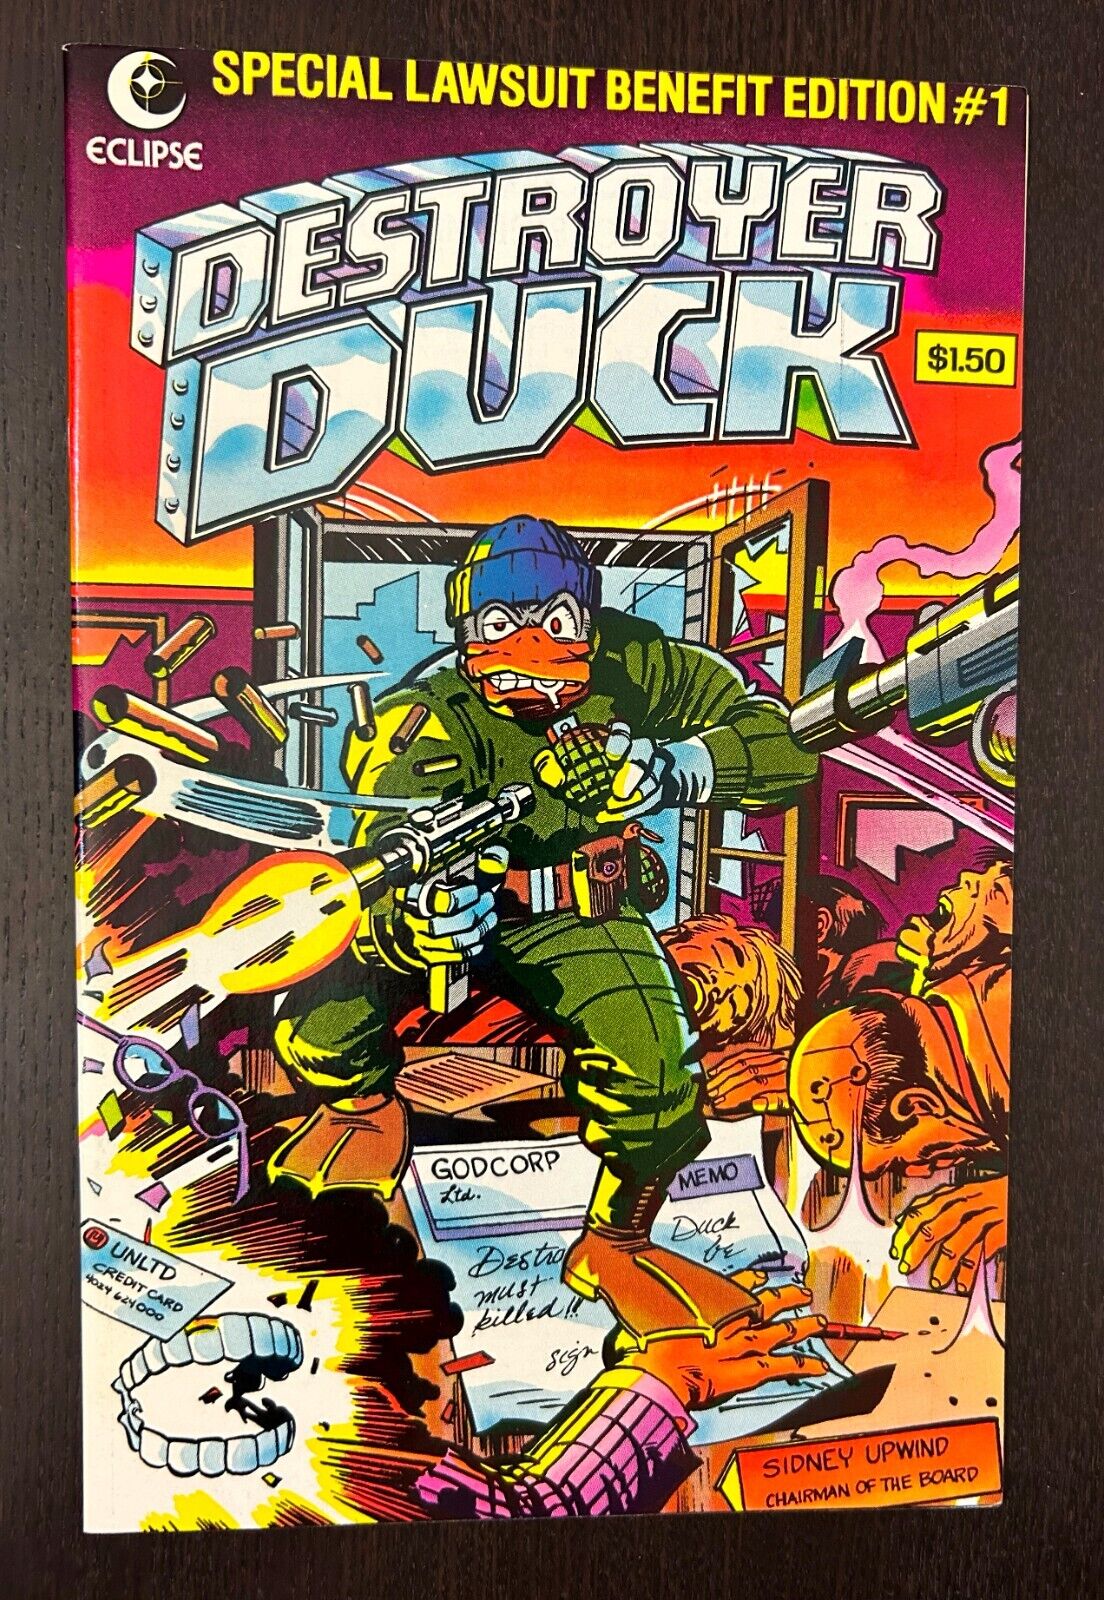 DESTROYER DUCK #1 (Eclipse Comics 1982) -- 1st Appearance GROO -- NM-